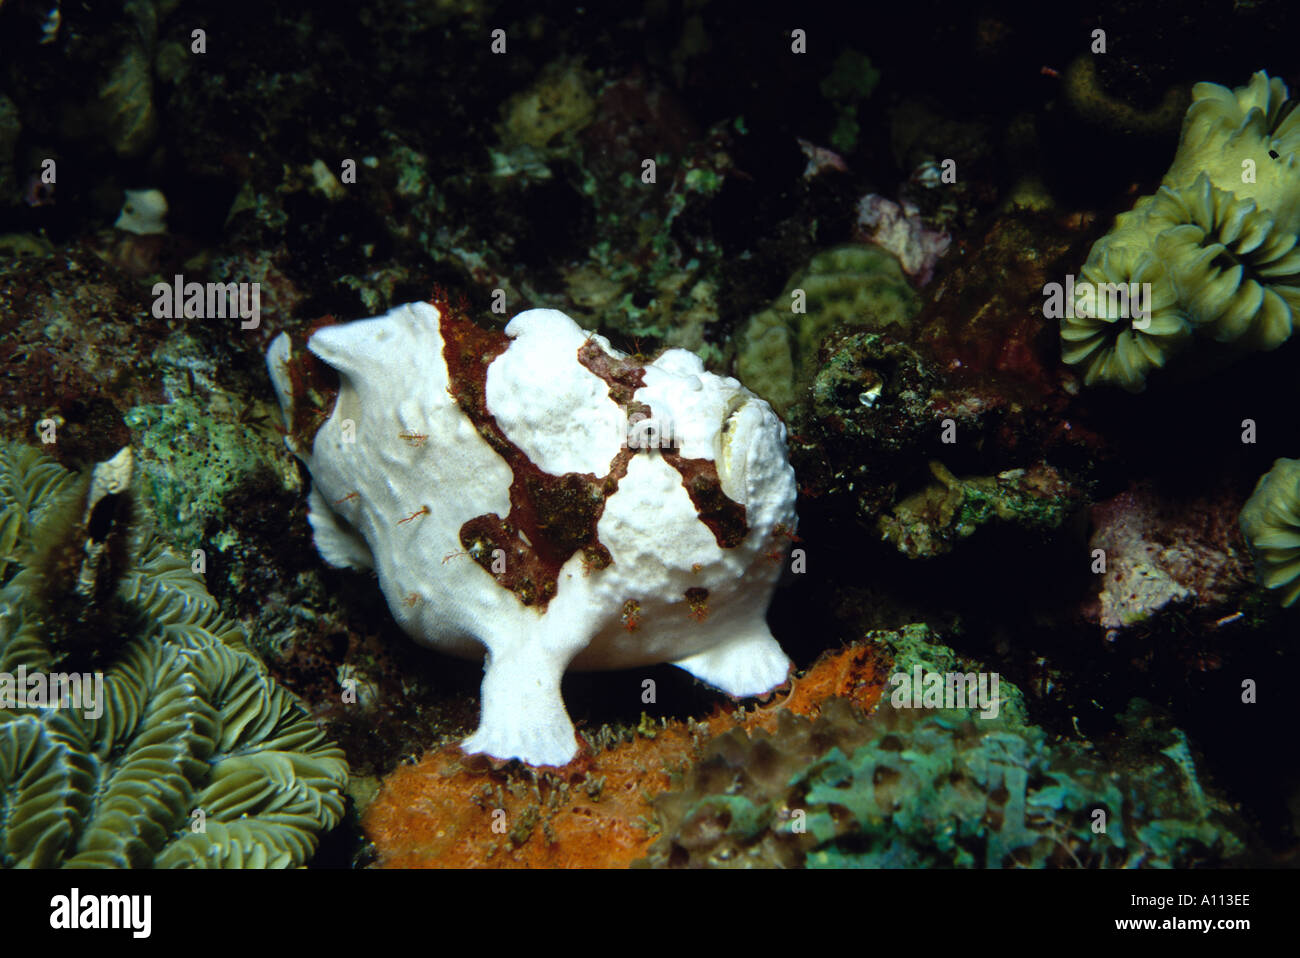 A LONGLURE FROGFISH Antennarius multiocellatus ATTEMPTS TO BLEND INTO THE CORAL BACKGROUND OF A REEF IN BONAIRE Stock Photo